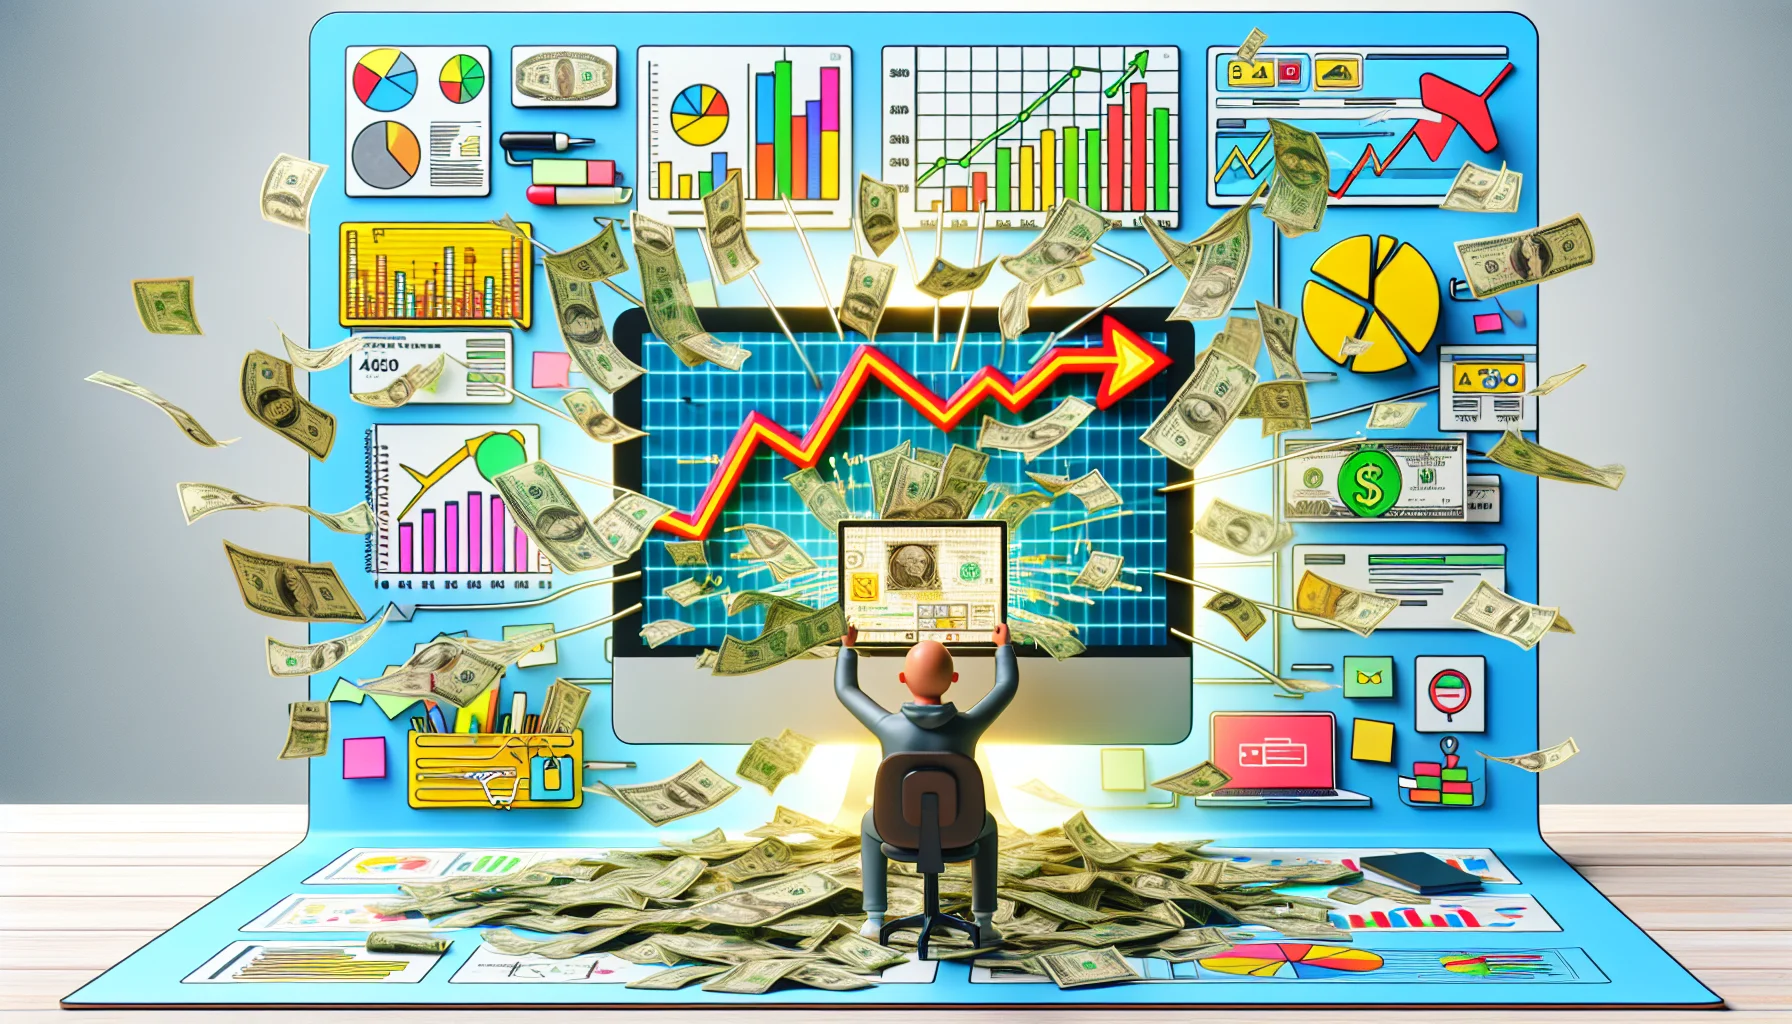 Generate an amusing, hyper-realistic image that portrays an eCommerce website's affiliate marketing program in relation to an interactive, online pinboard platform. Picture the dynamic in a compelling scenario linked to earning money online. It showcases graphs illustrating growth in income, attractive bright-colored infographics of money flowing in from multiple sources. The background is light & airy filled with commonly used eCommerce, online marketing and digital advertising imagery. A comical element could be a tiny character sitting in front of a sizeable computer screen, amazed by the potential earnings flashing on their screen.